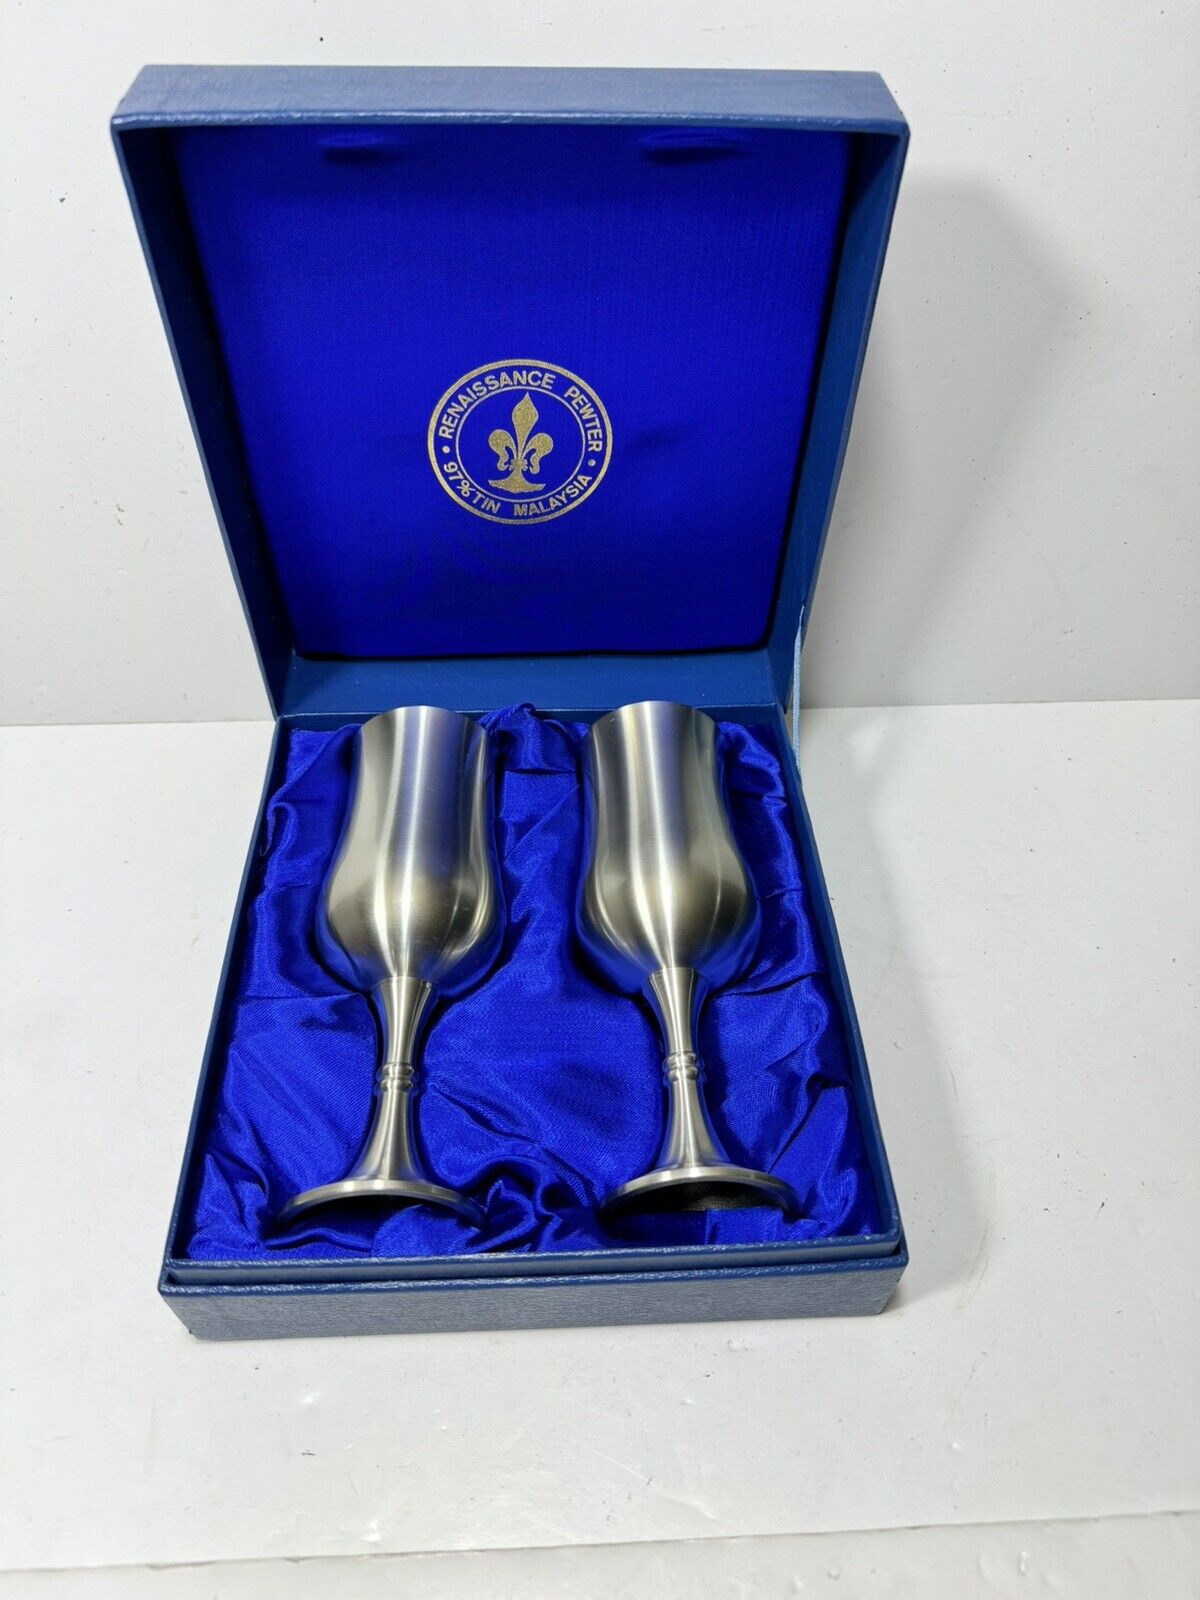 Renaissance Pewter 97% Tin Malaysia Two Goblets Cups In Box B92